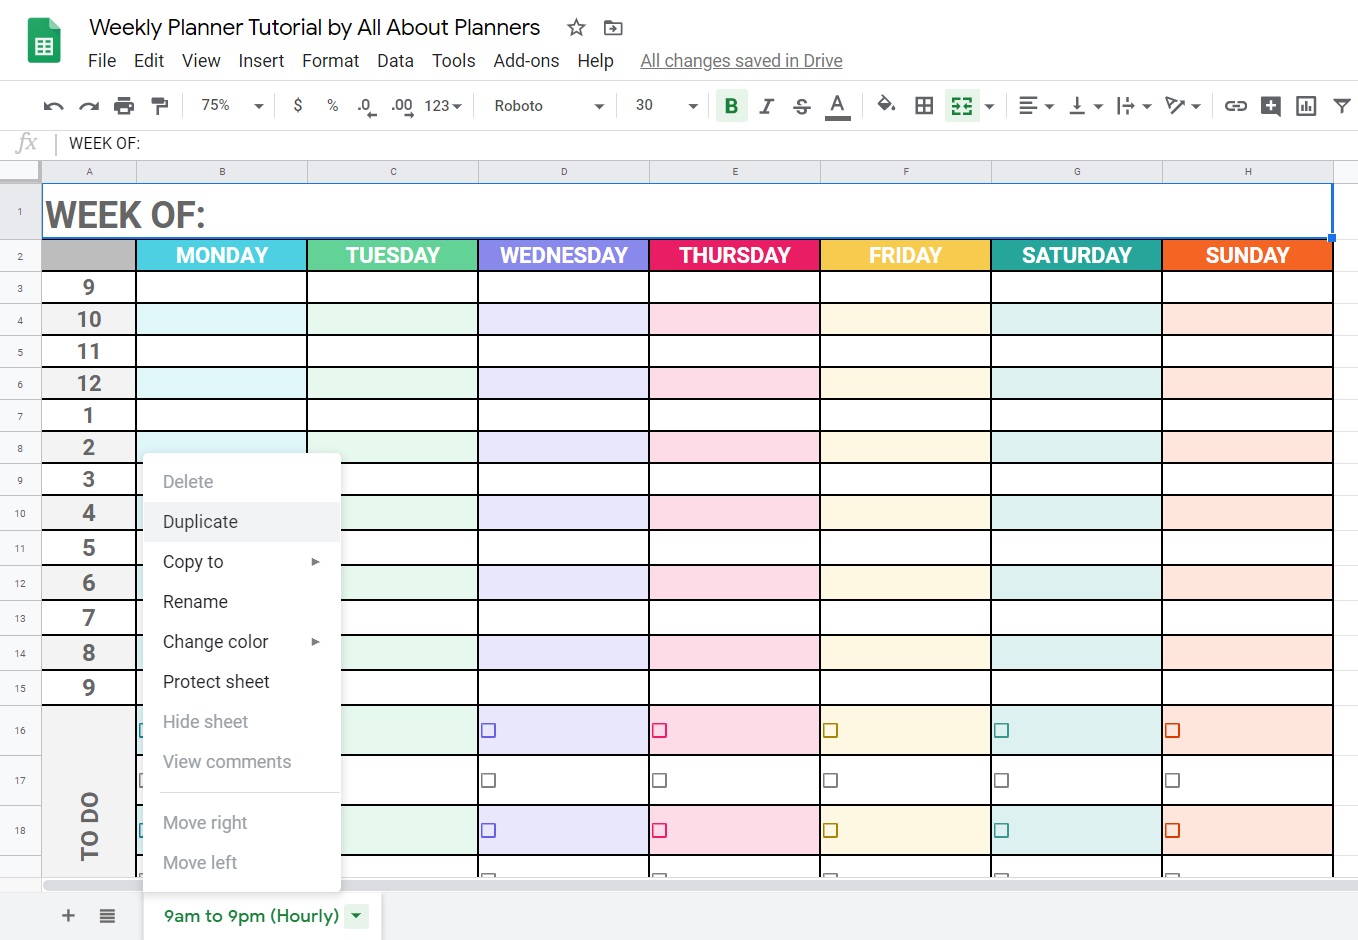 How to make a weekly planner using Google Sheets (free online tool)